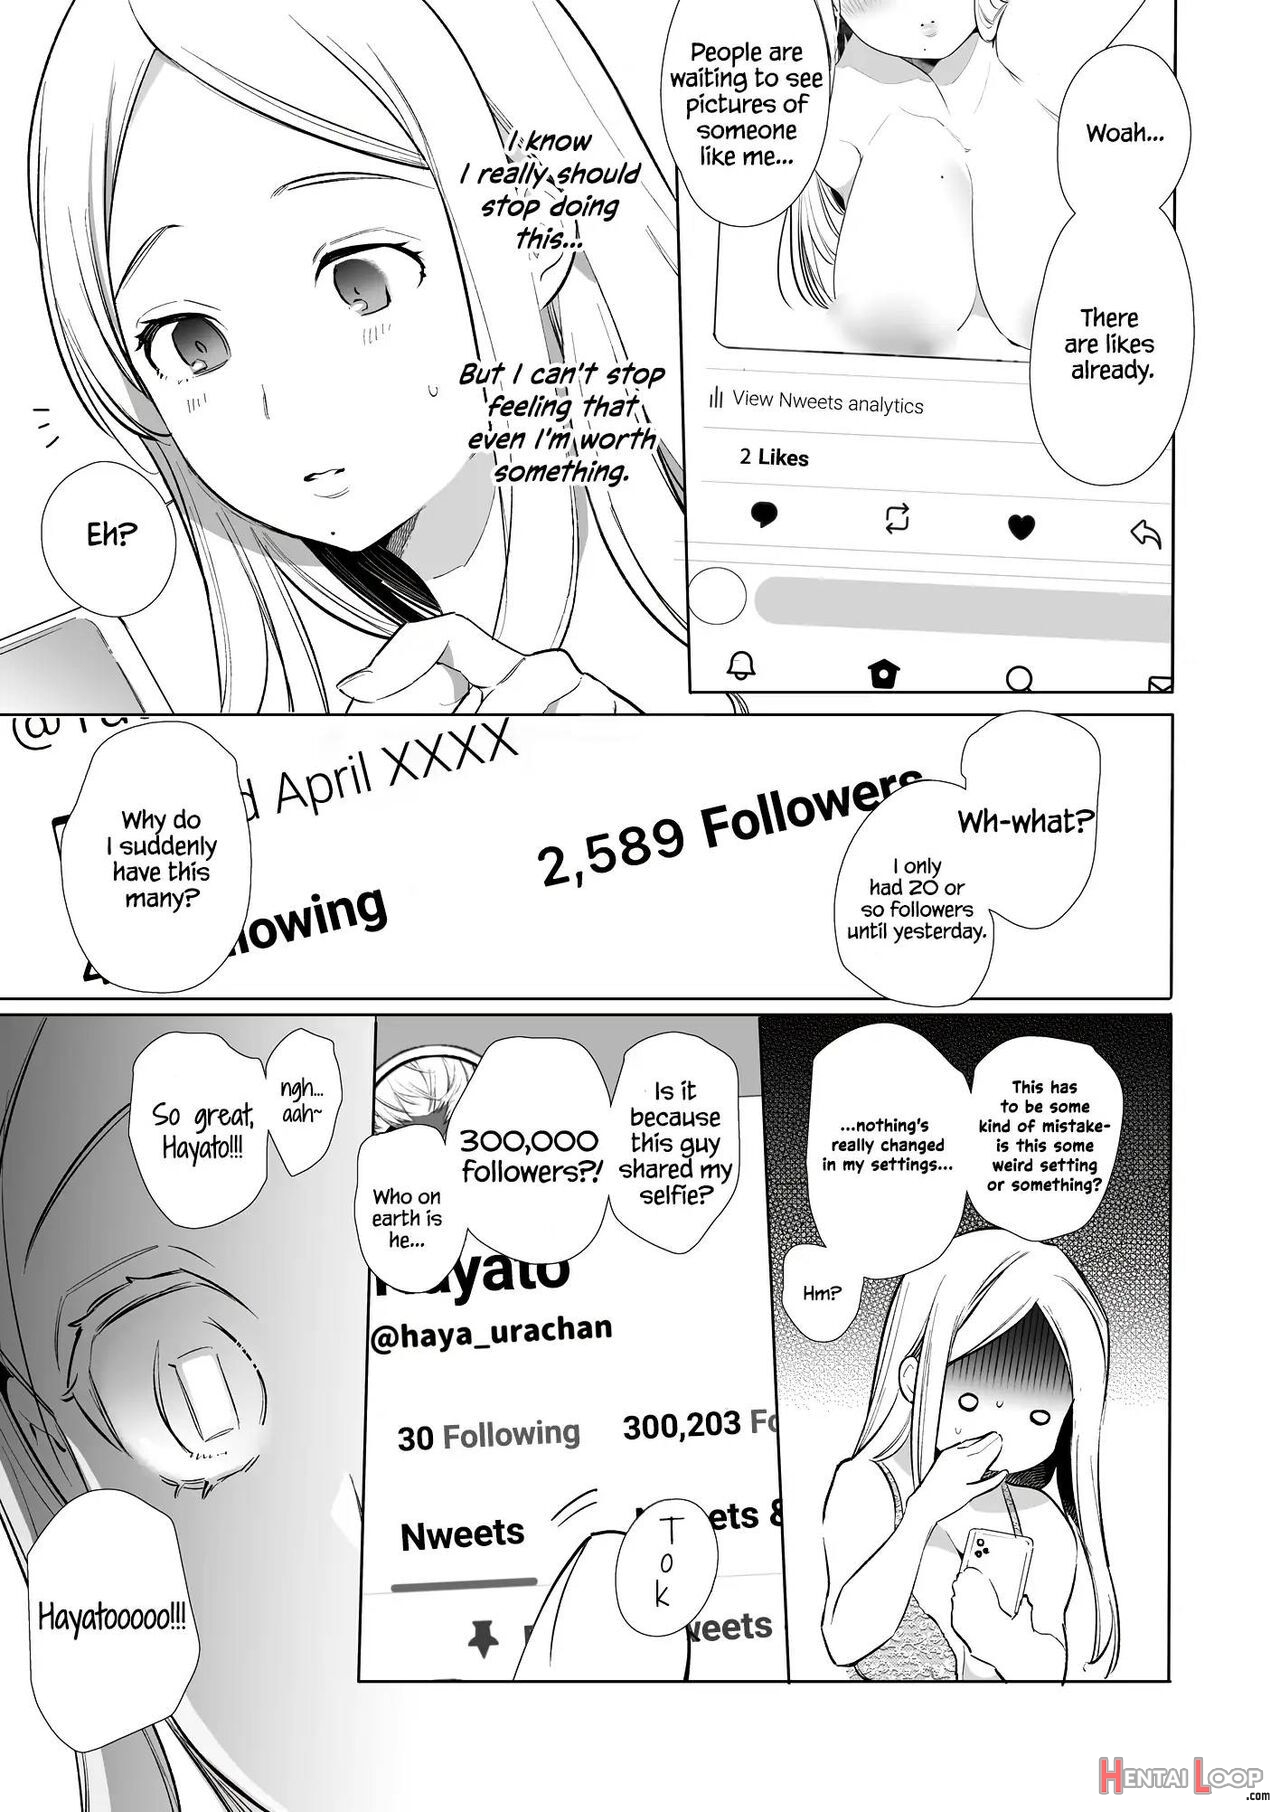 Kana-san Ntr ~ Degradation Of A Housewife By A Guy In An Alter Account ~ – Decensored page 8